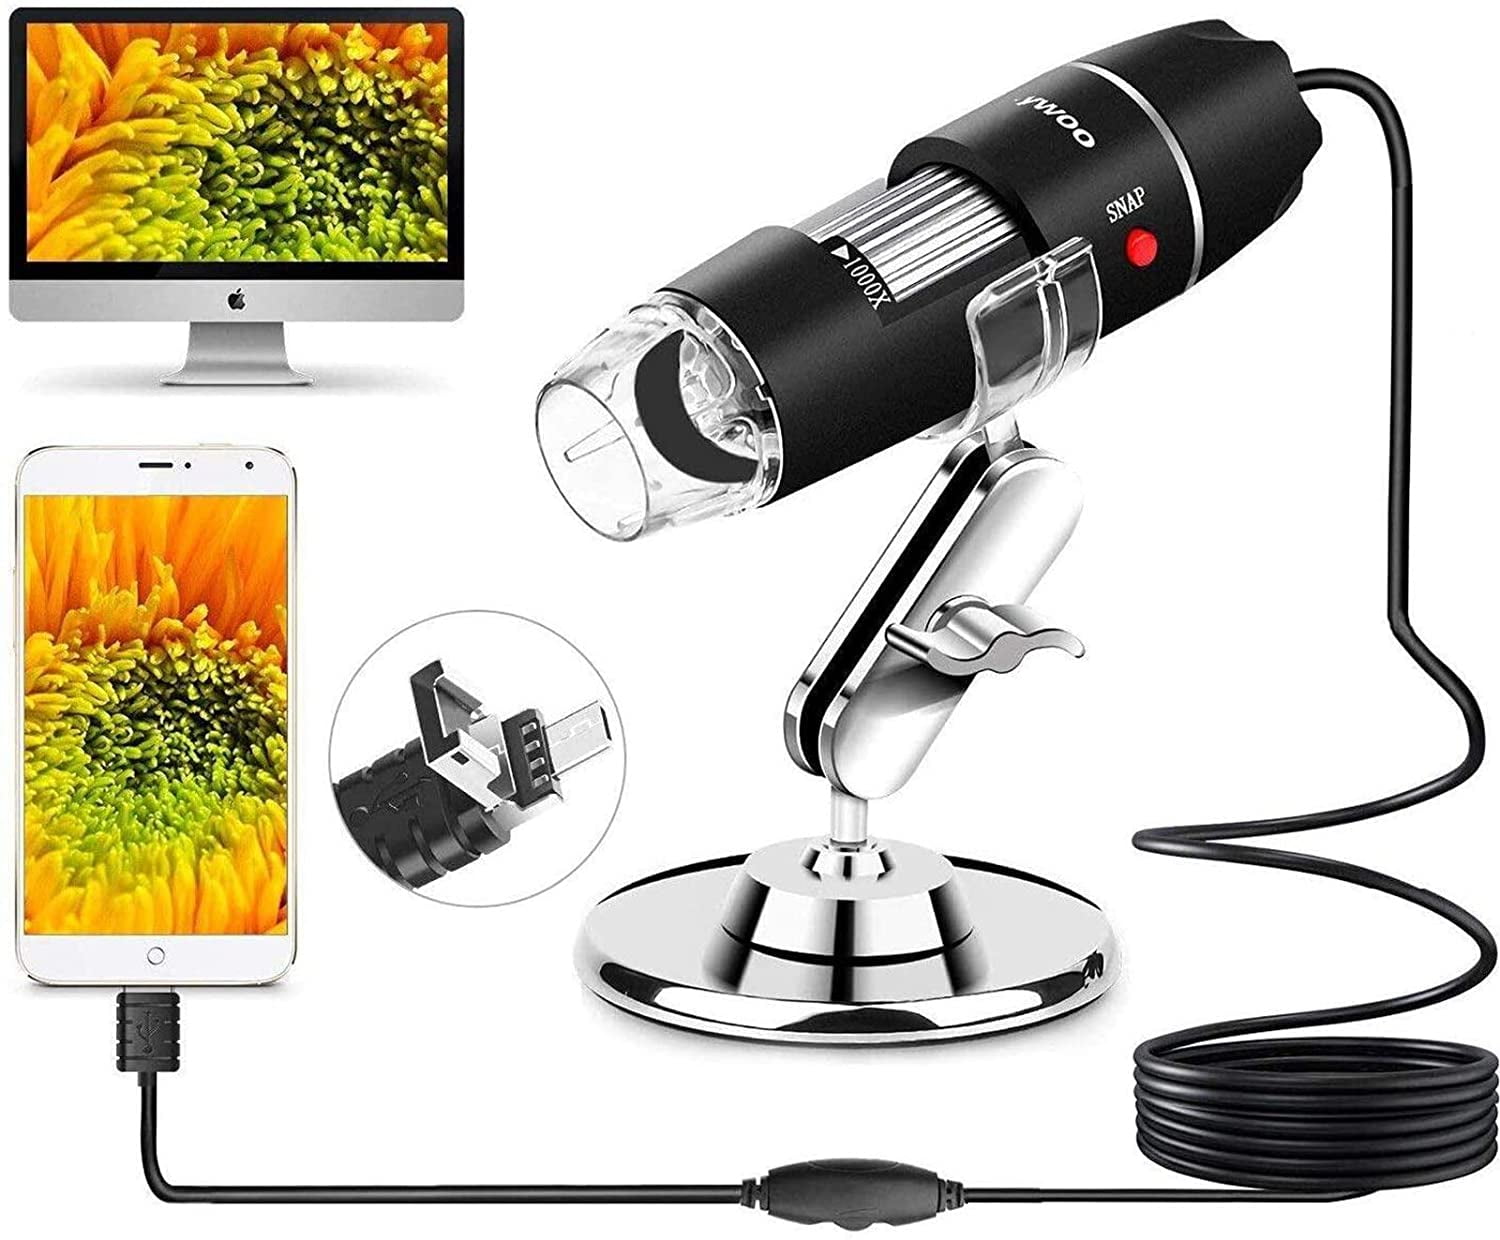 Compatible with Mac Window 7 8 10 Android Linux USB Microscope Digital Magnification Endoscope 40 to 1000x Mini Camera with OTG Adapter Suction Cup Stand 8 Adjustable LEDs 